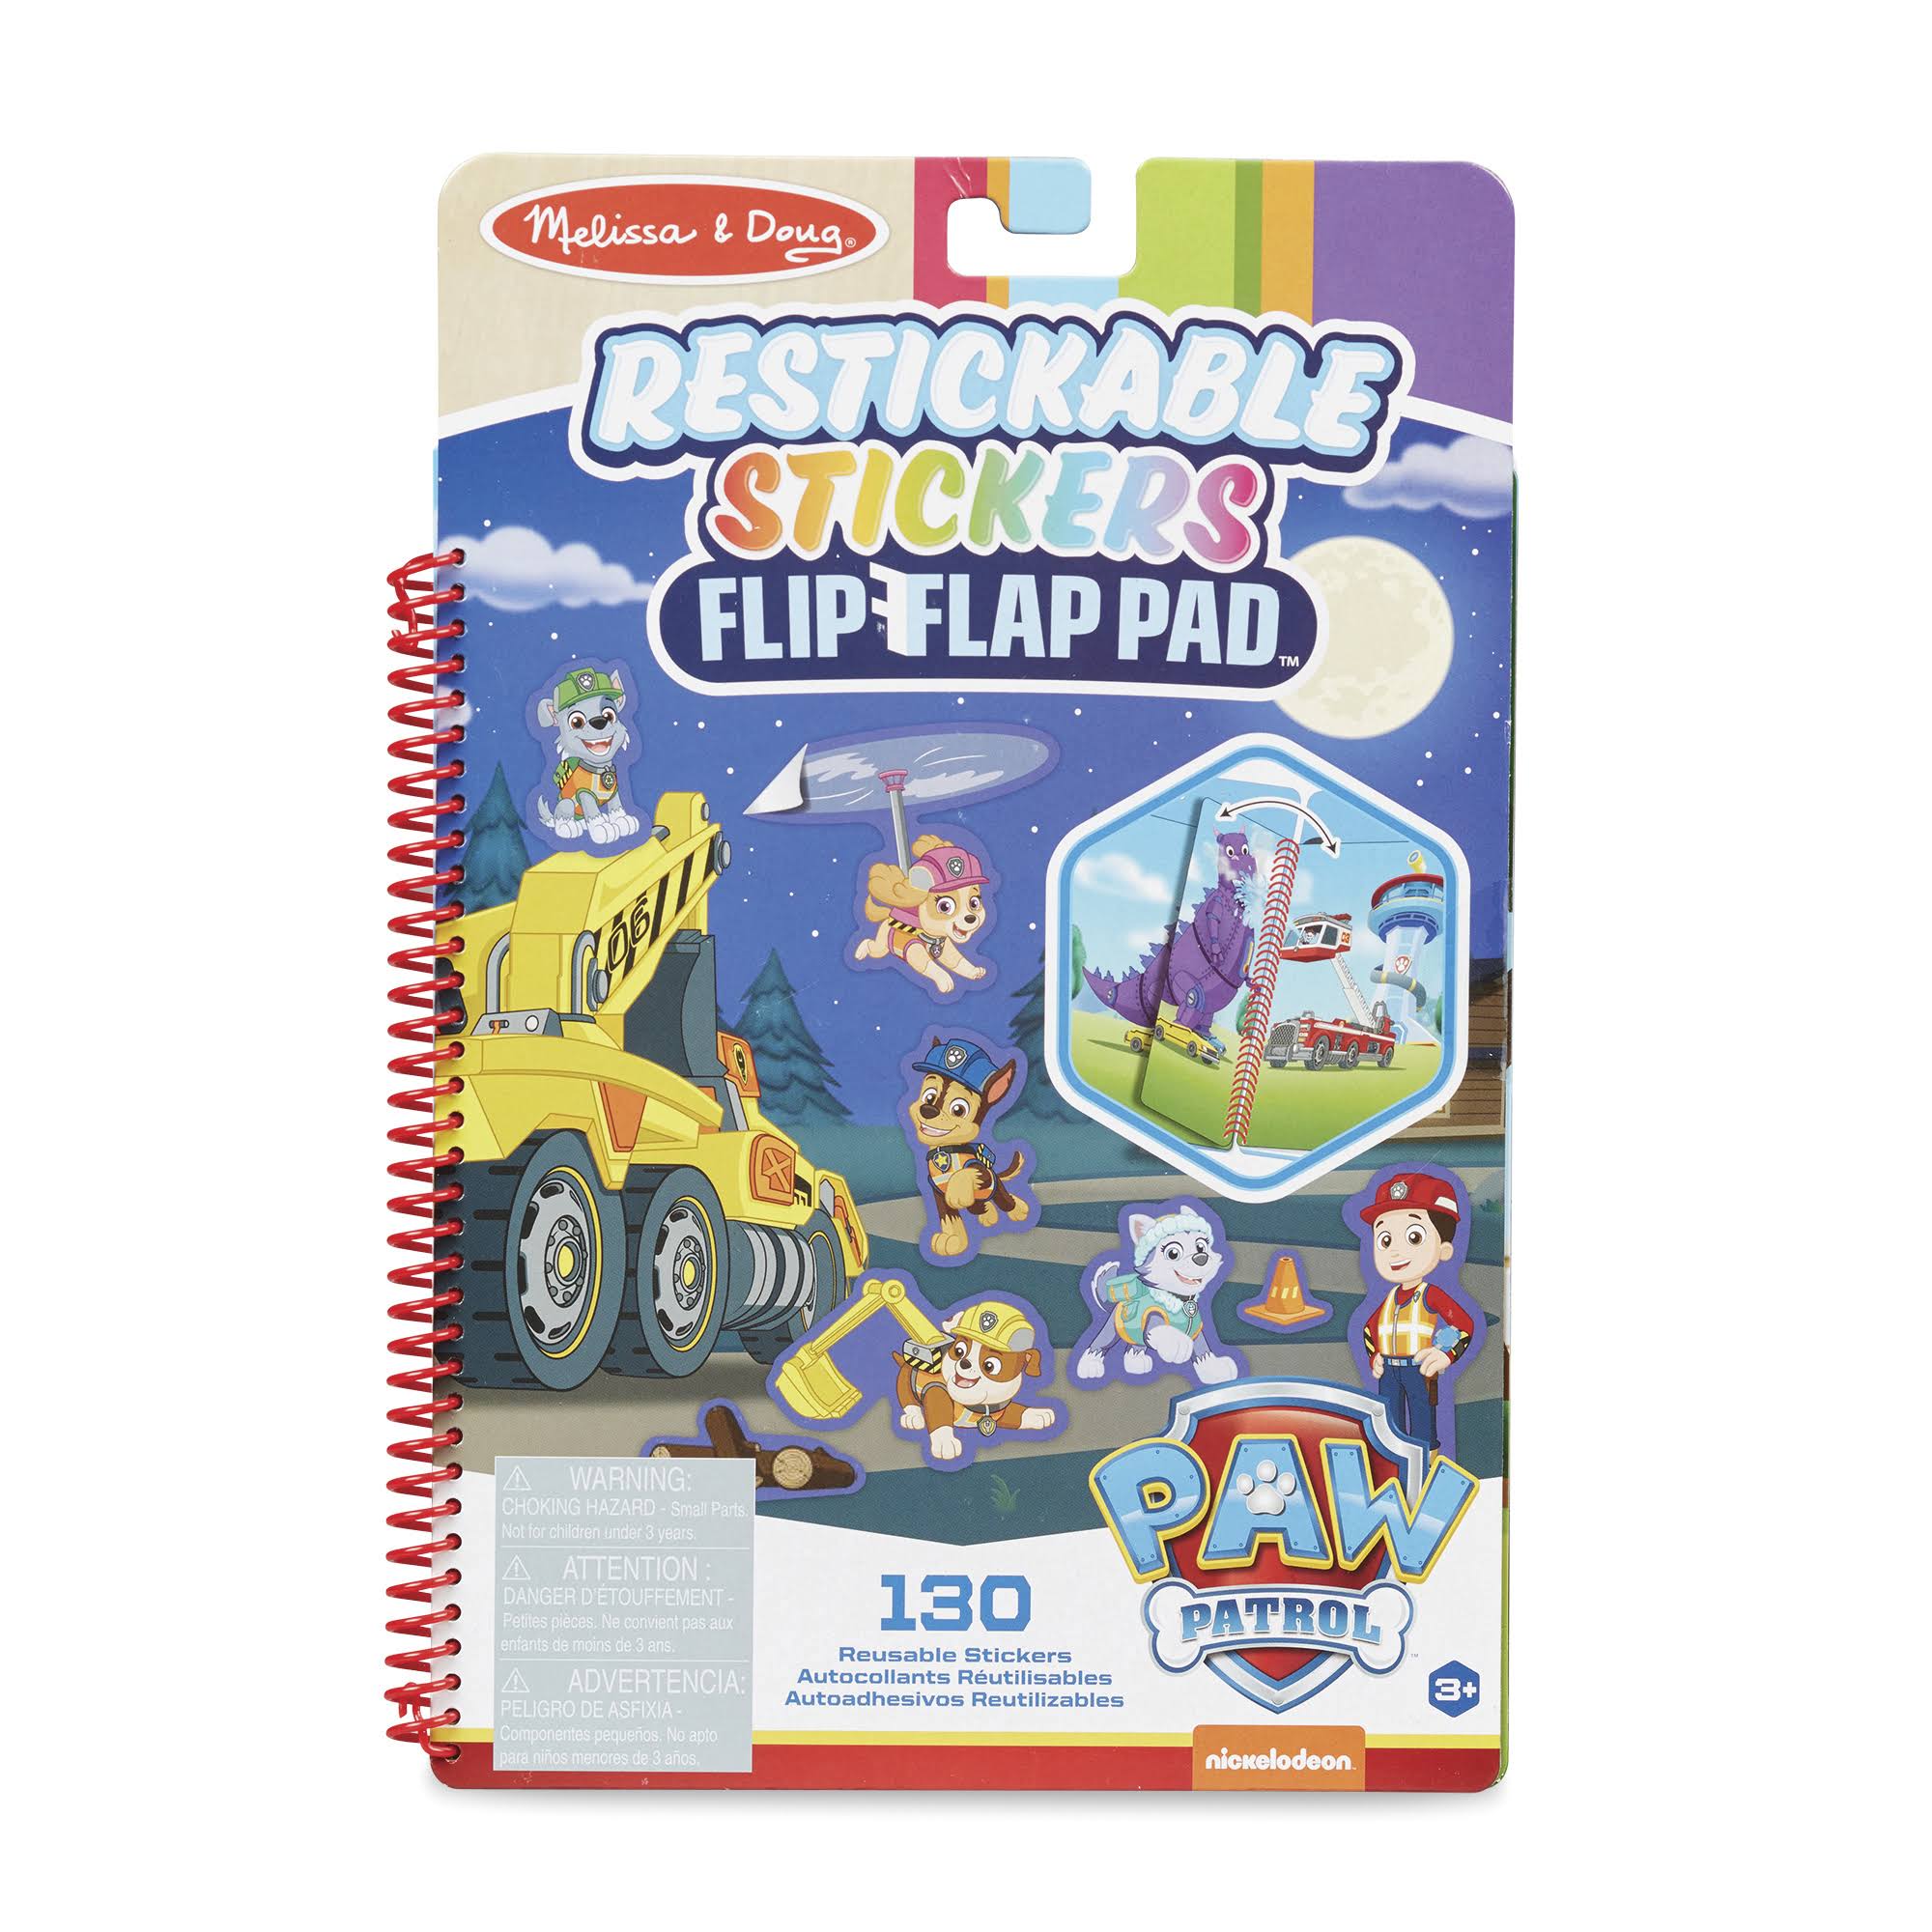 Melissa and Doug - Paw Patrol Ultimate Rescue Restickable Stickers Flip-Flap Pad